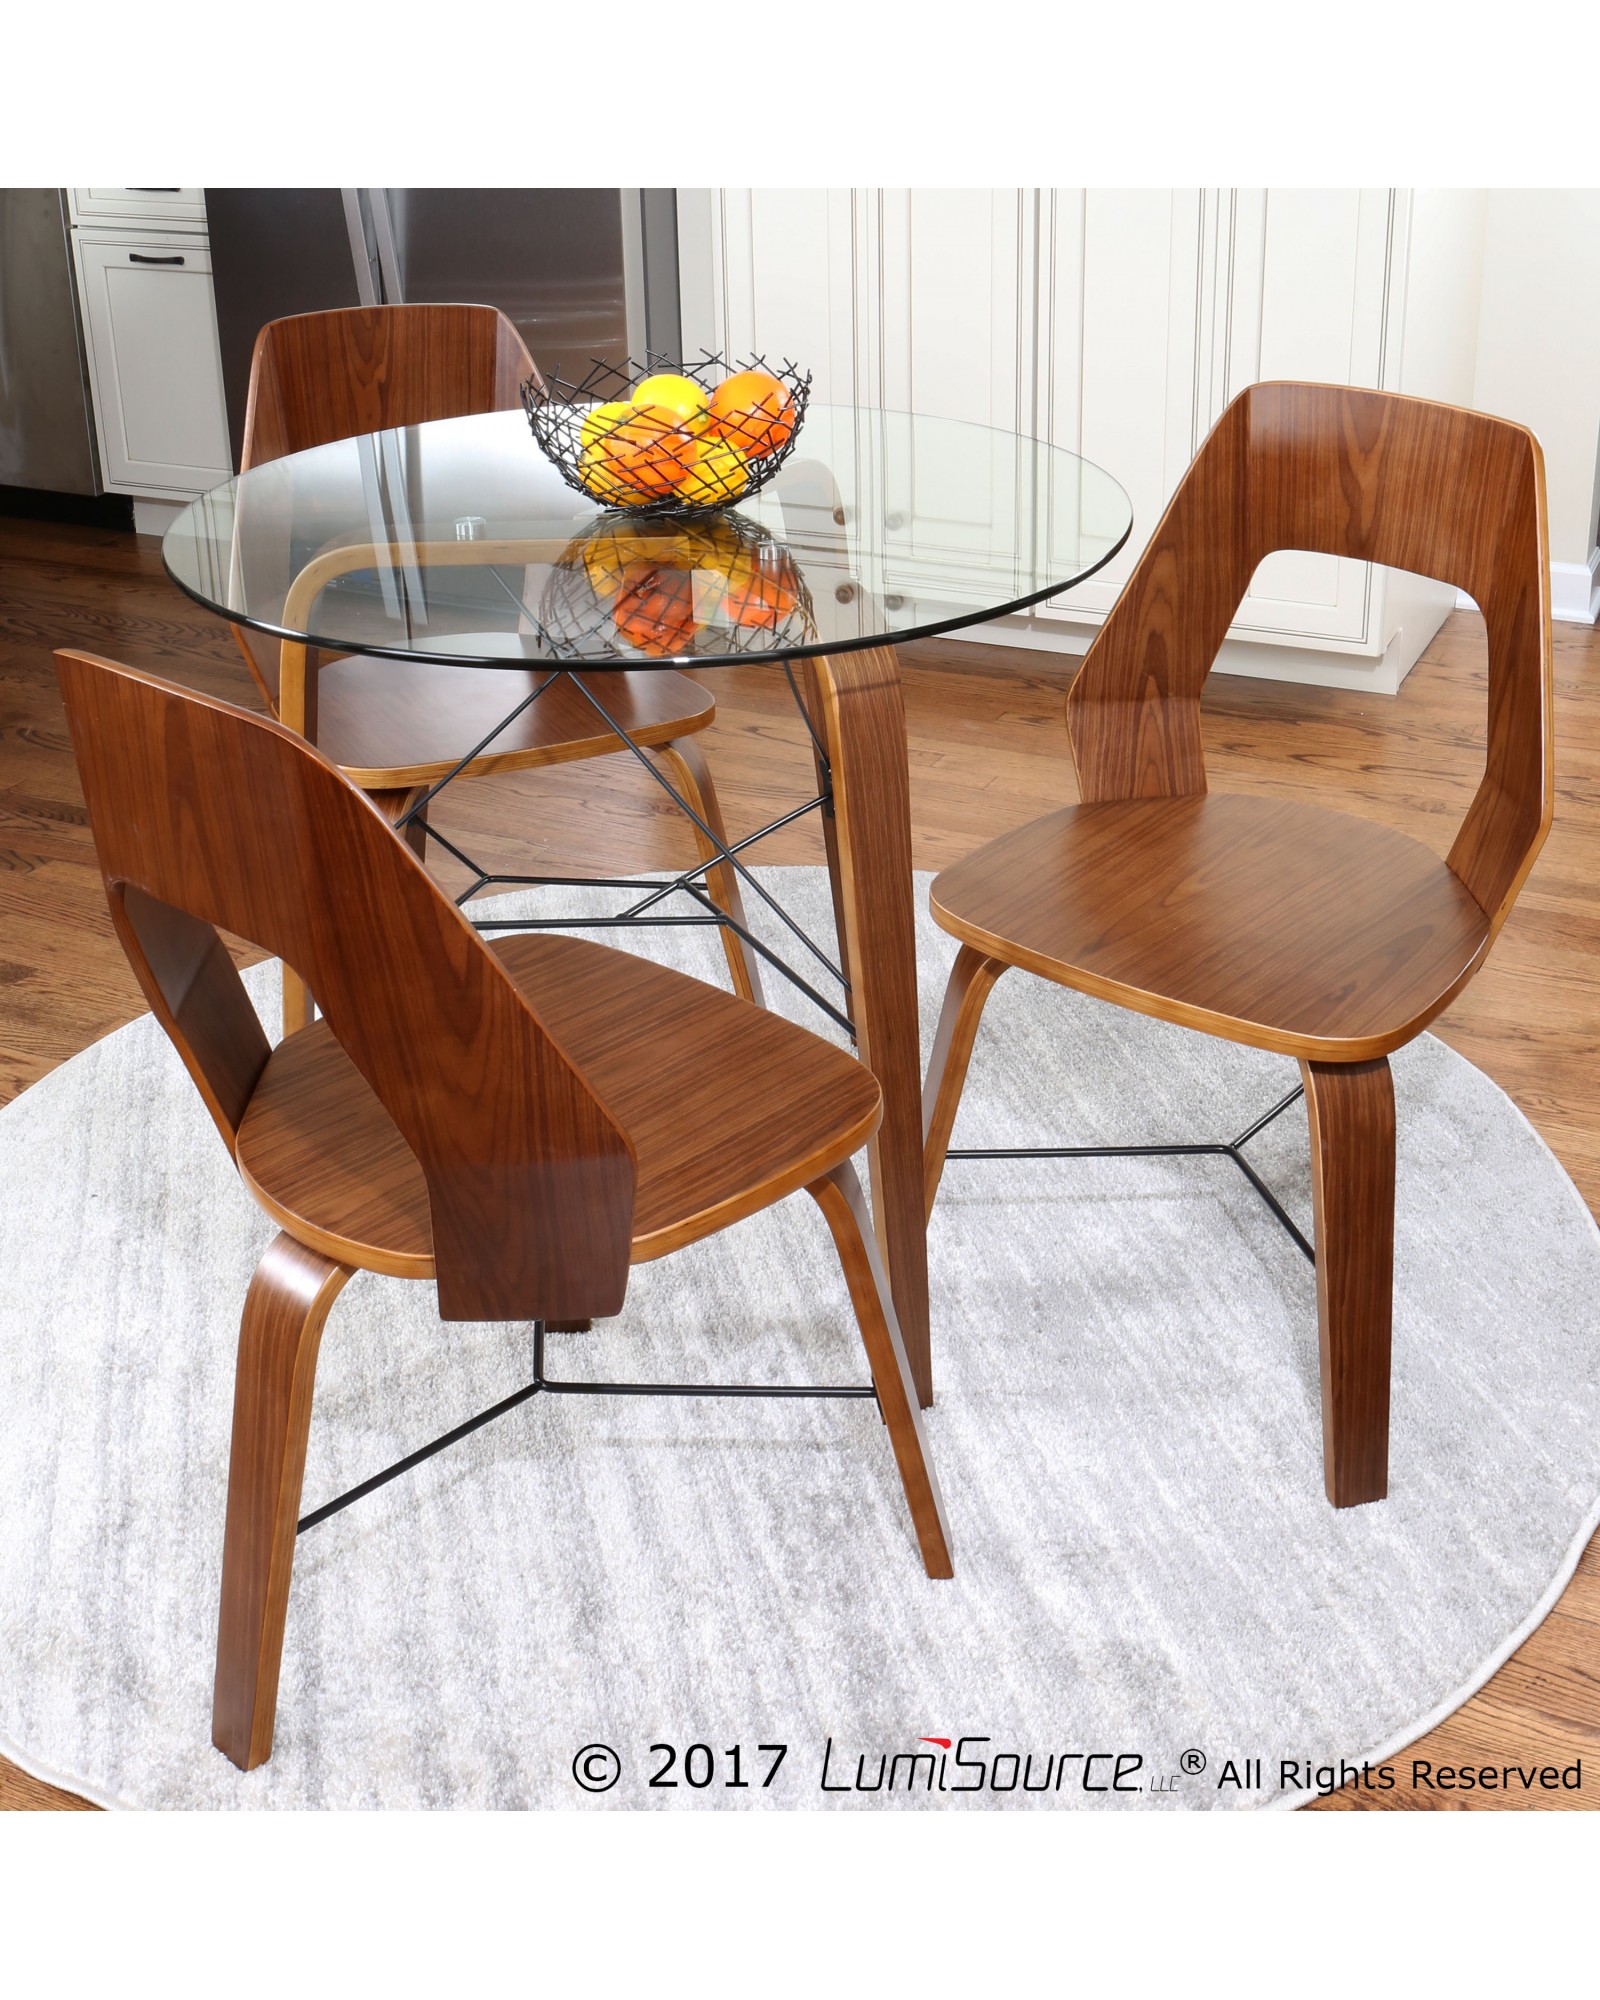 Trilogy Contemporary Dining Chairs in Walnut Wood - Set Of 2